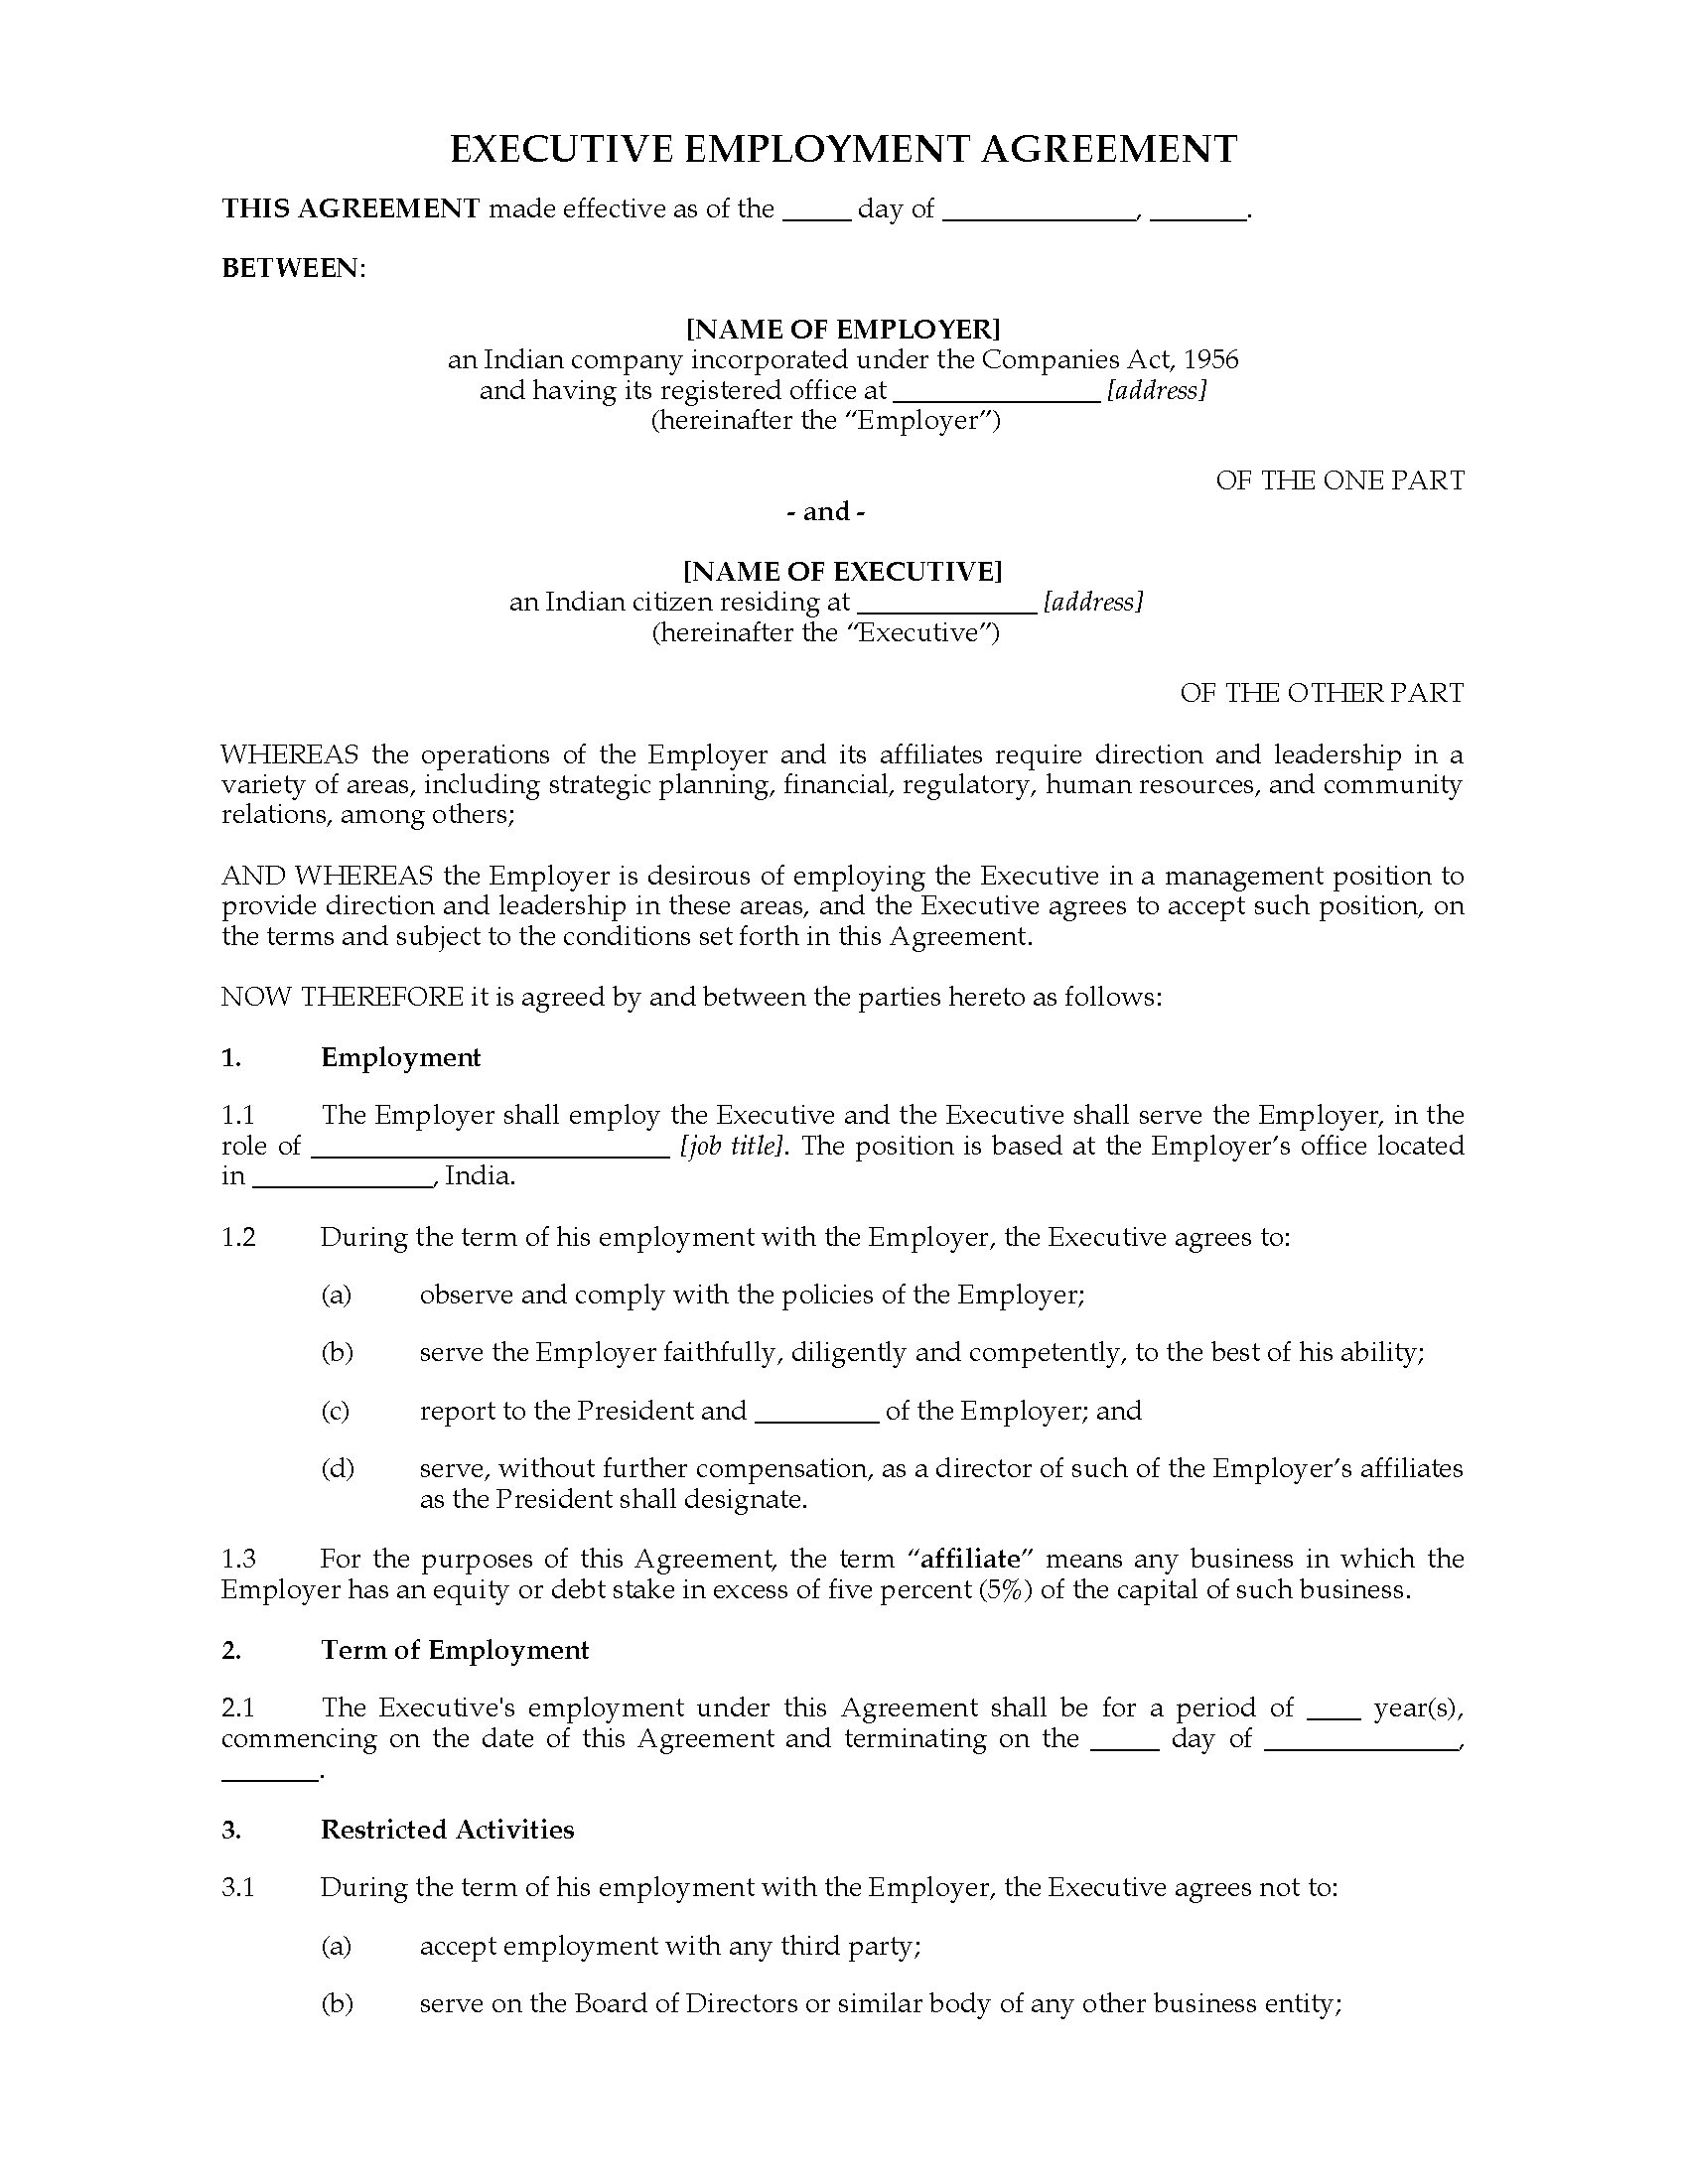 india employment agreement for executive job